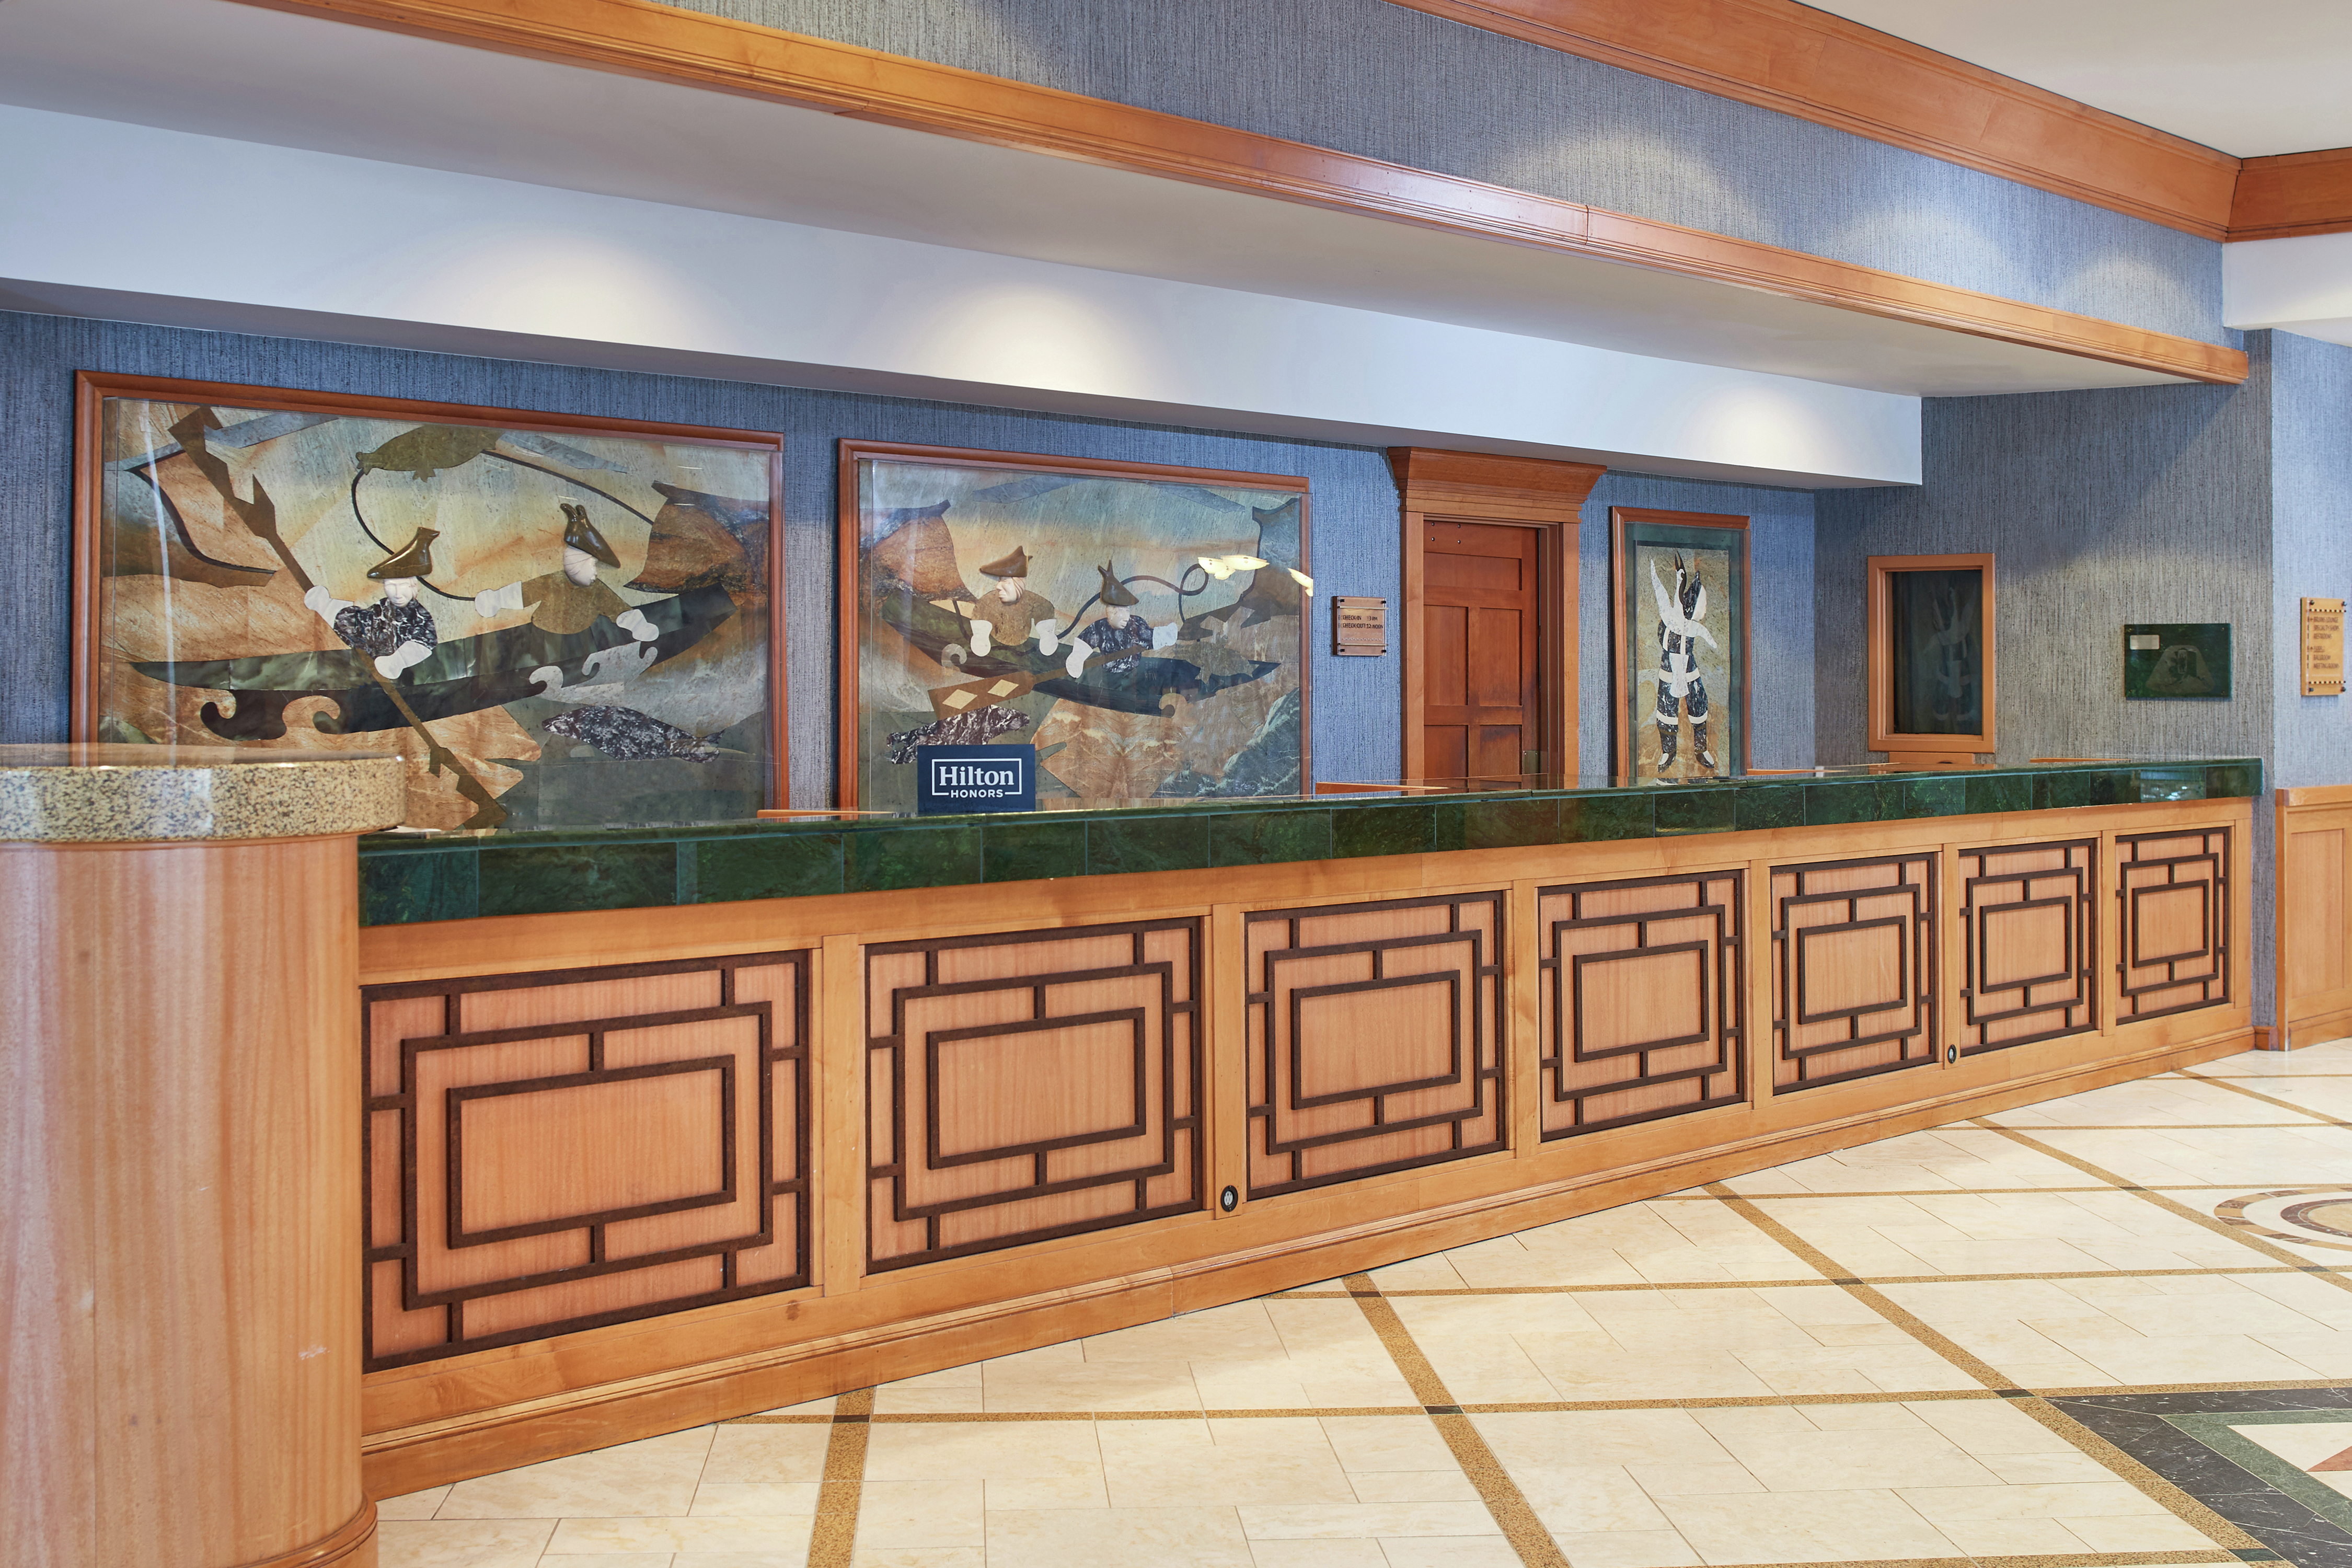 Reception desk with Alaskan art on display on the wall